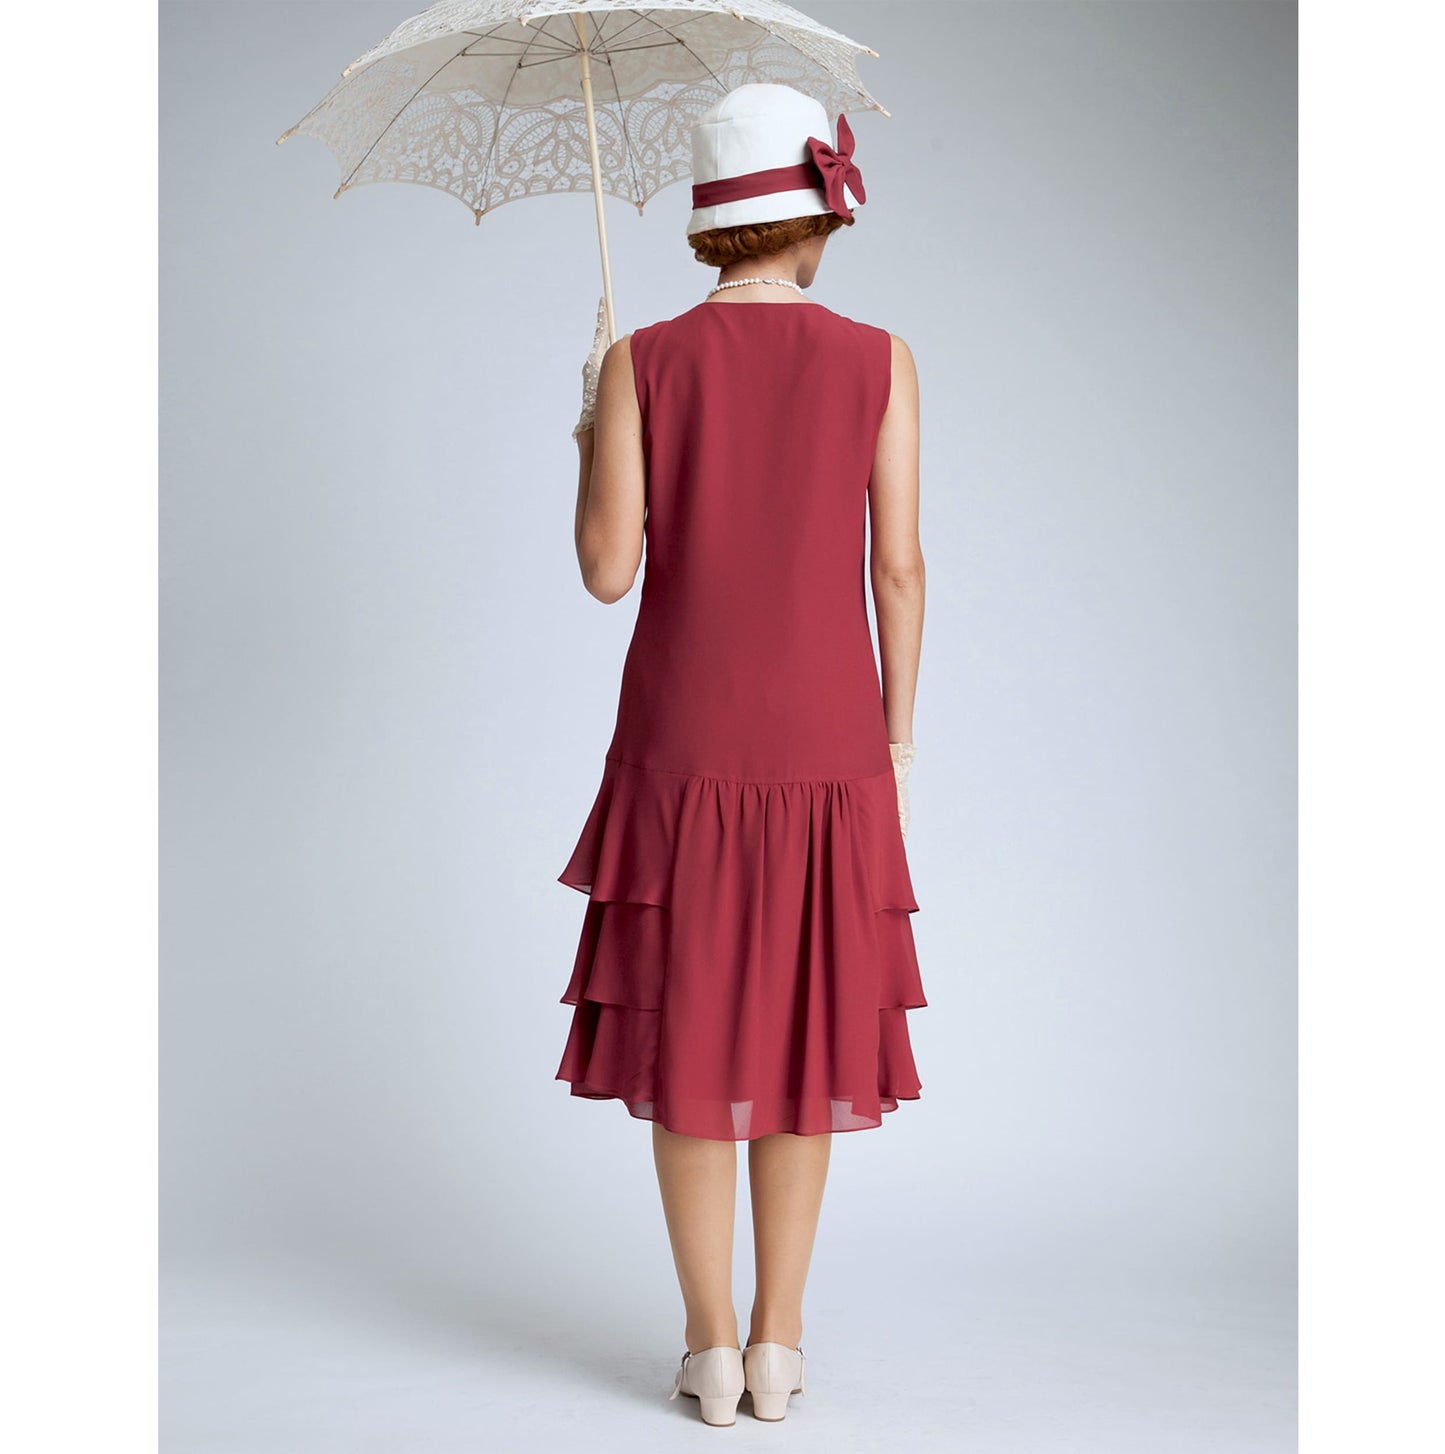 Great Gatsby chiffon dress in maroon red with tiered skirt